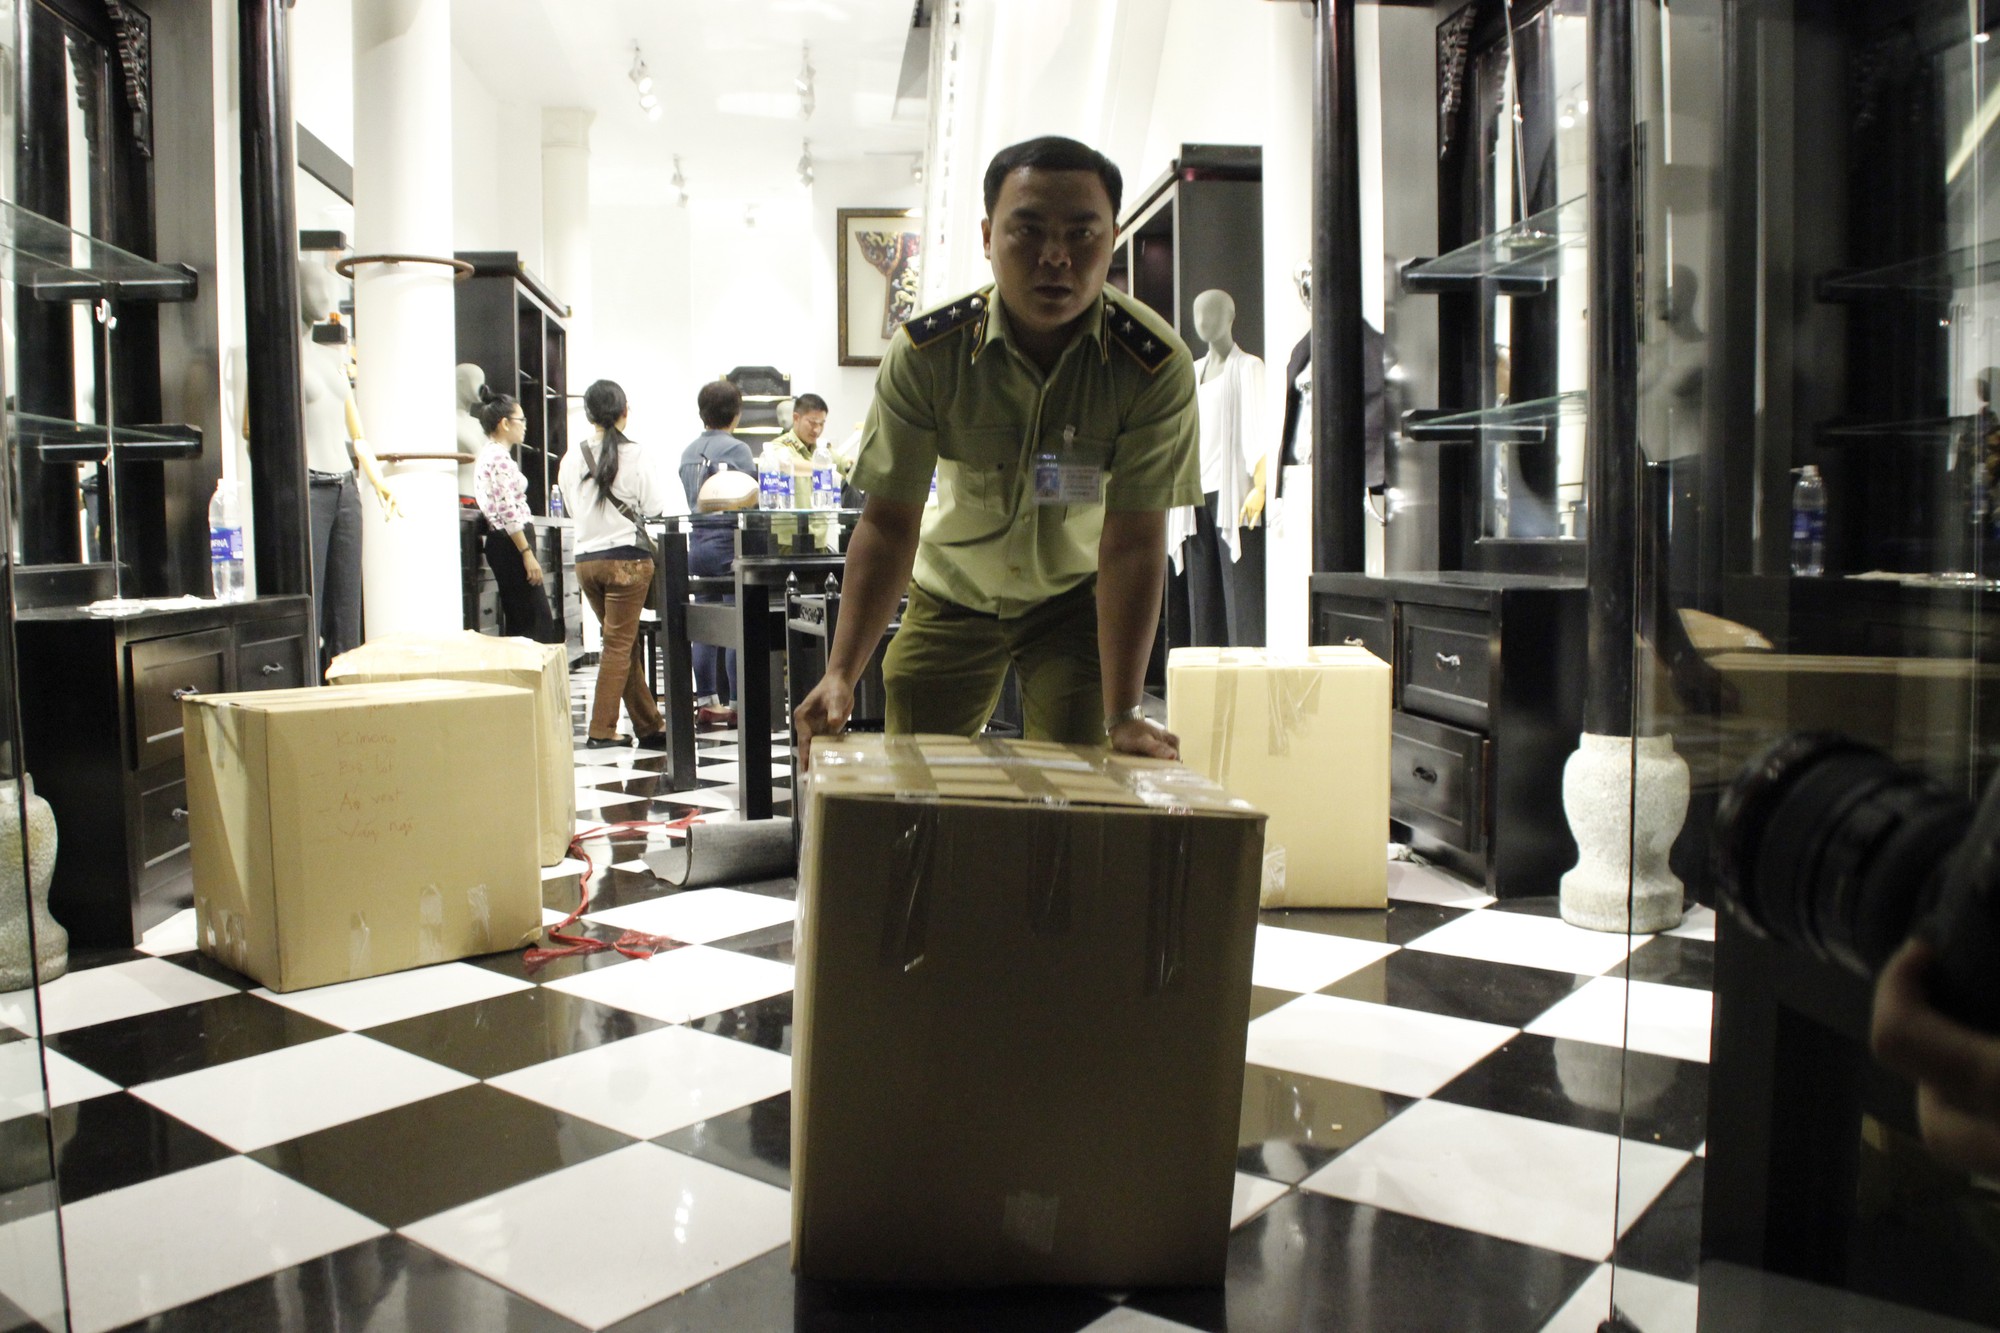 ​Over 1,000 Khaisilk products confiscated in Ho Chi Minh City amid mislabeling crisis